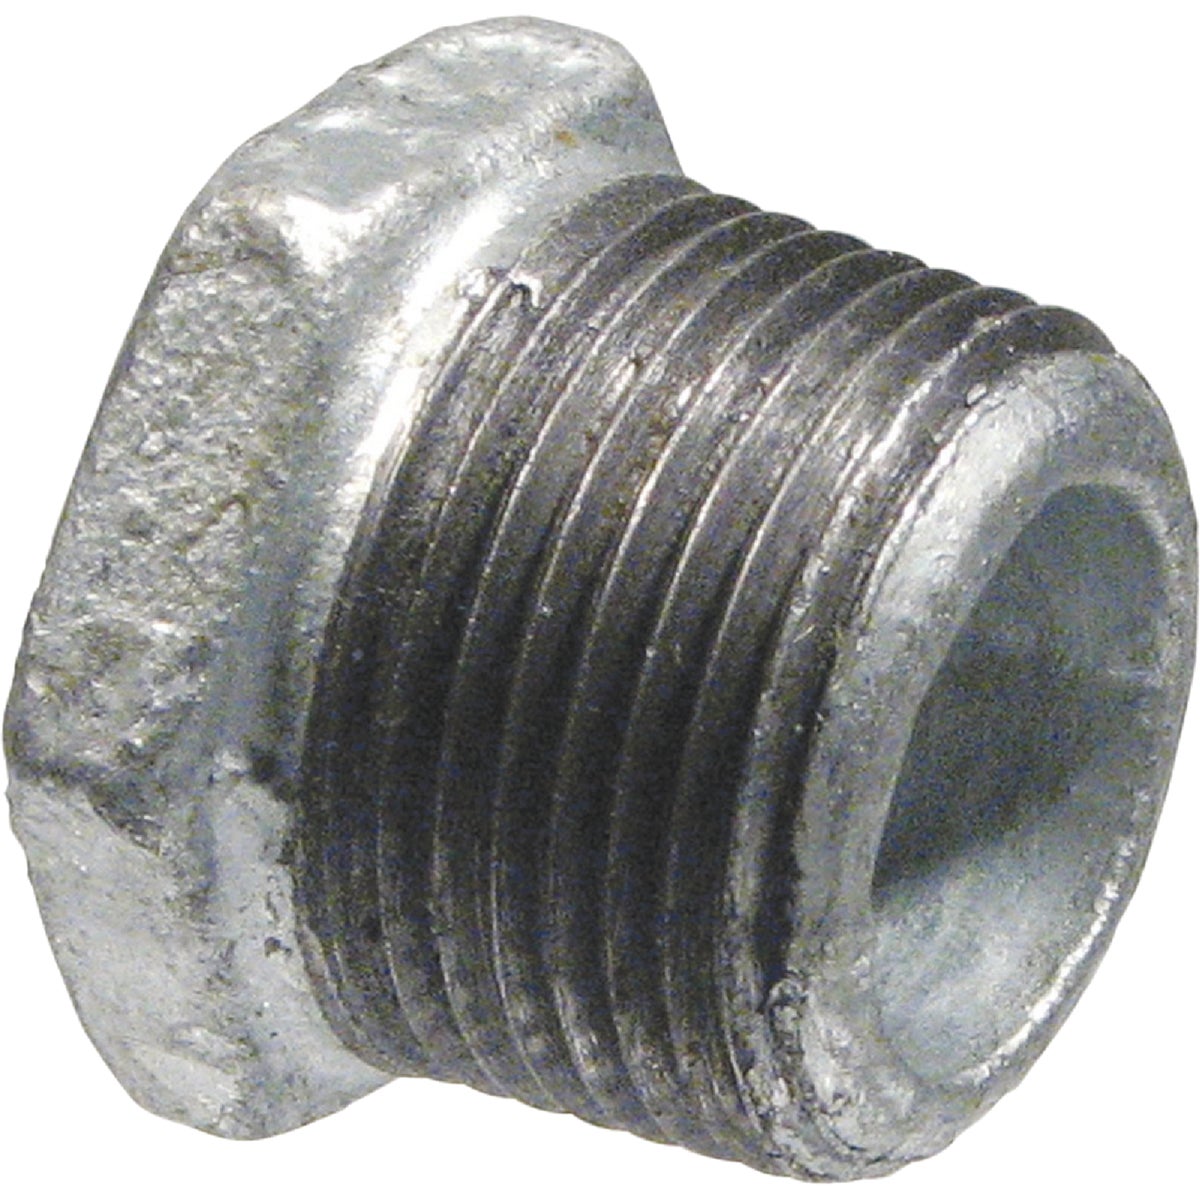 Southland 1/2 In. x 1/8 In. Hex Galvanized Bushing